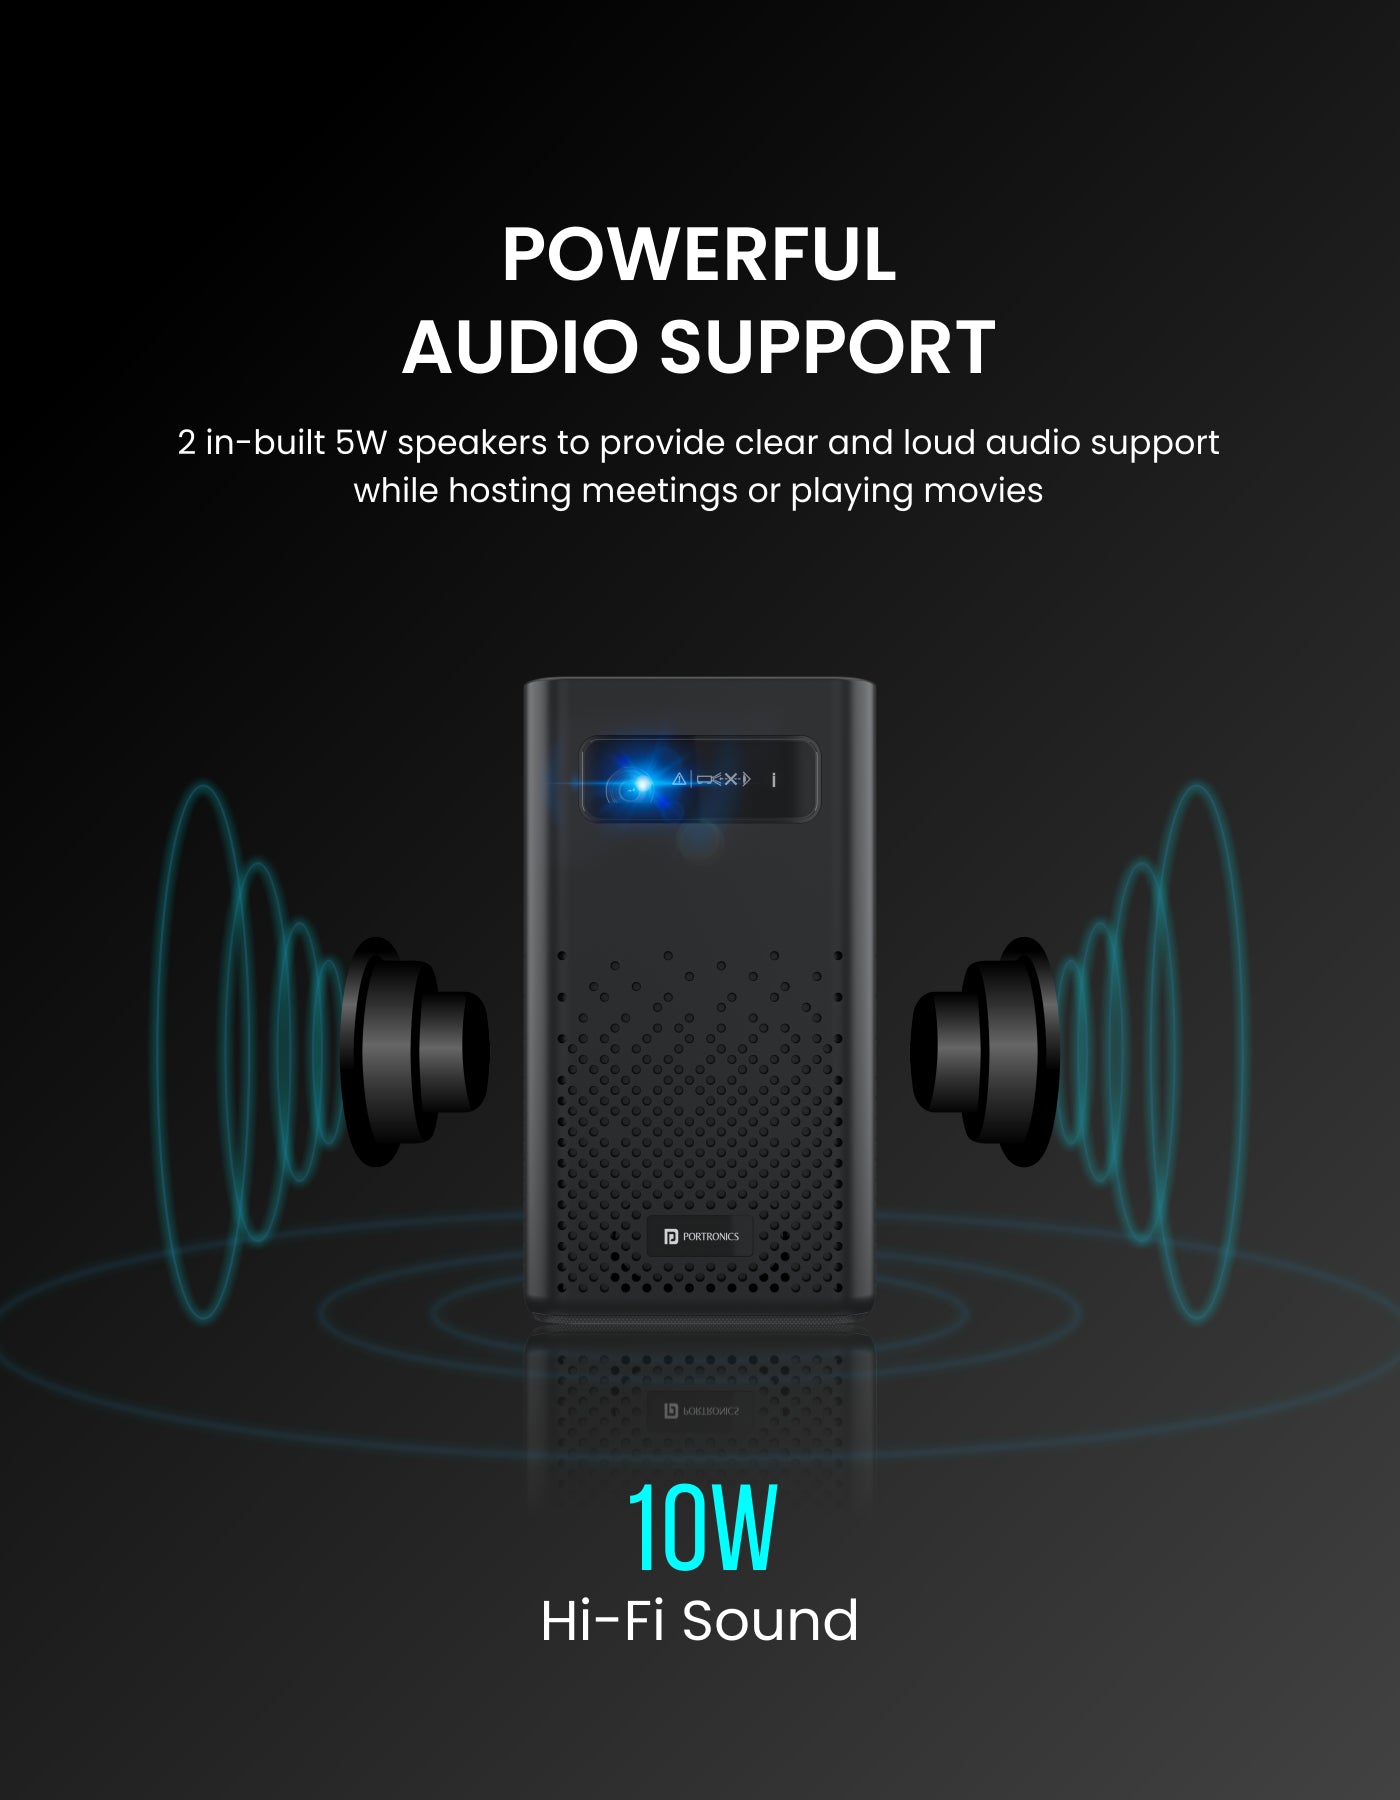 Powerful audio support in portronics Pico11 portable/smart/ bluetooth projector